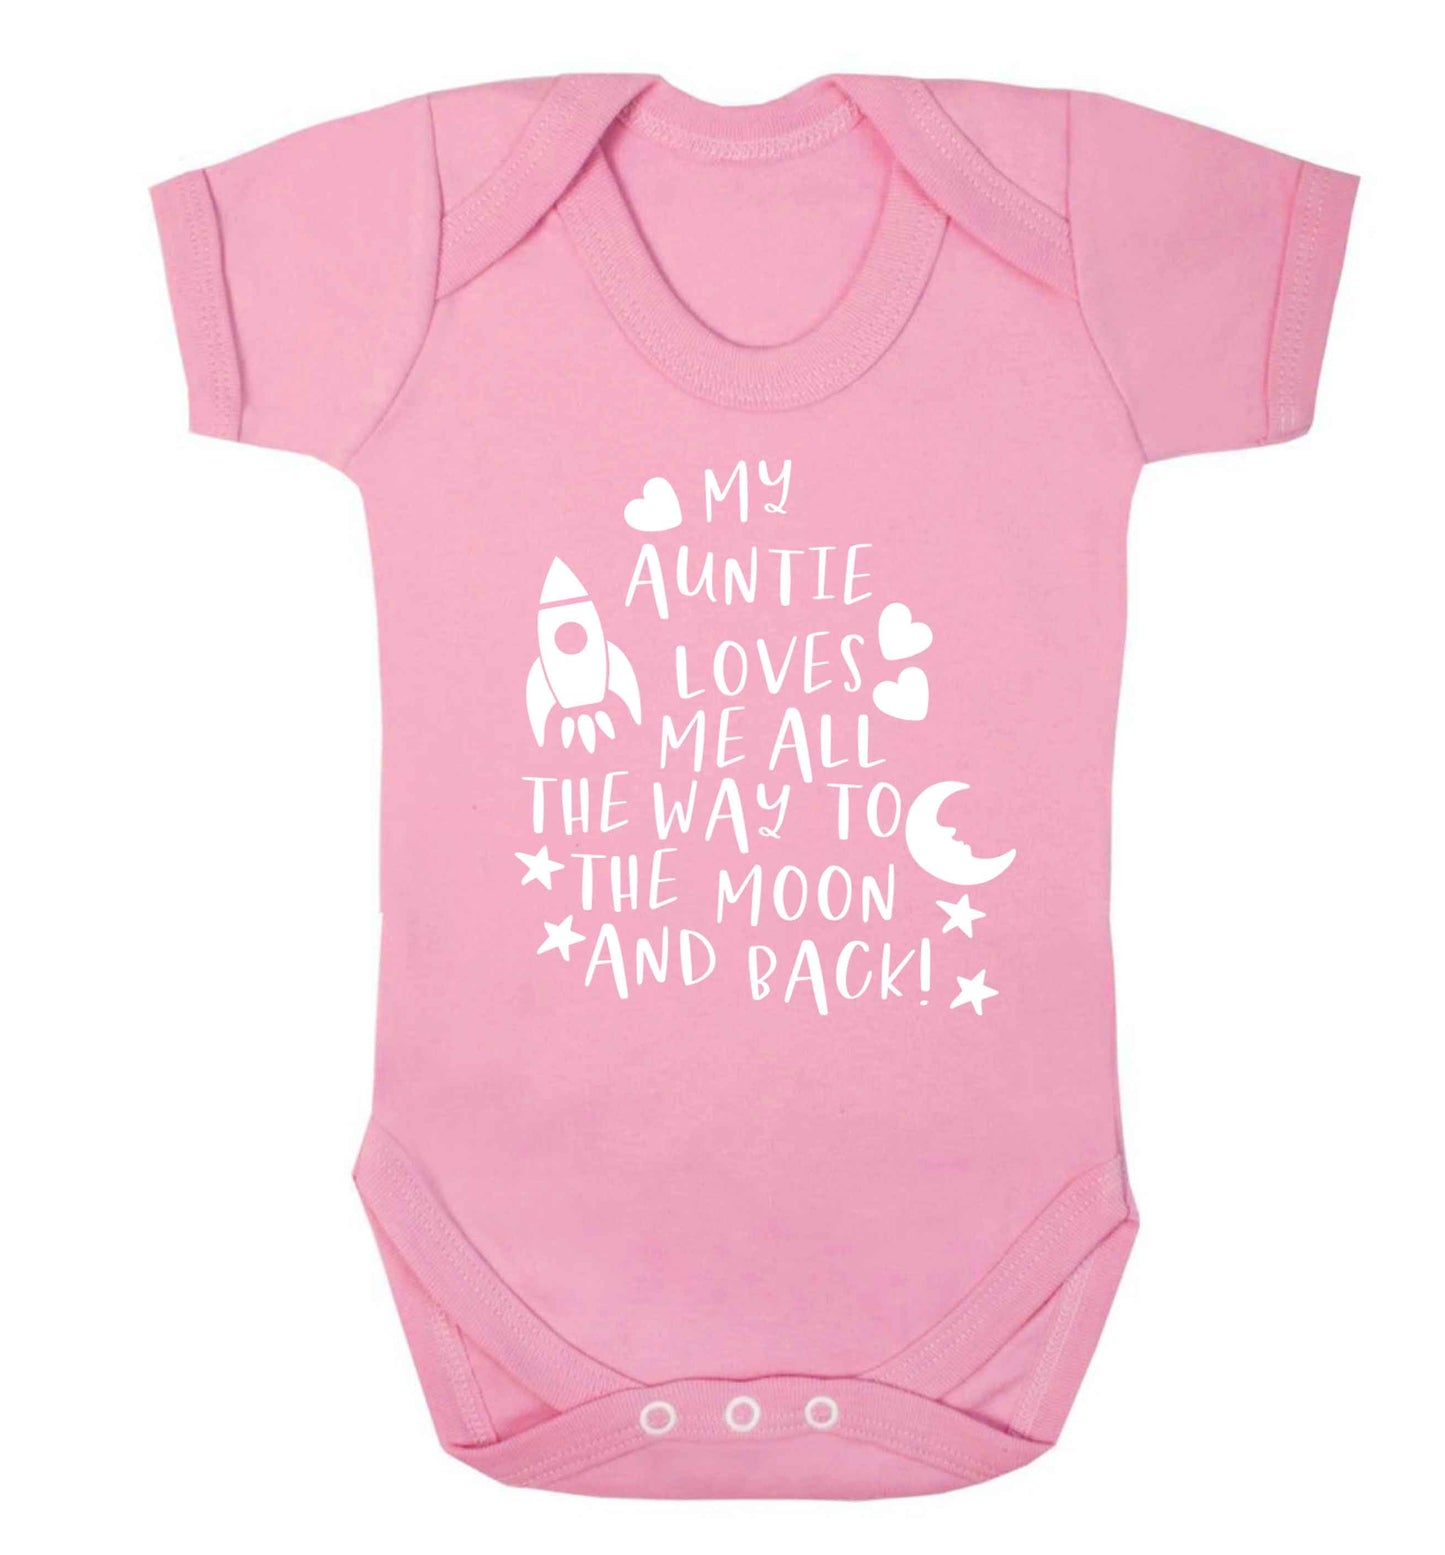 My auntie loves me all the way to the moon and back Baby Vest pale pink 18-24 months